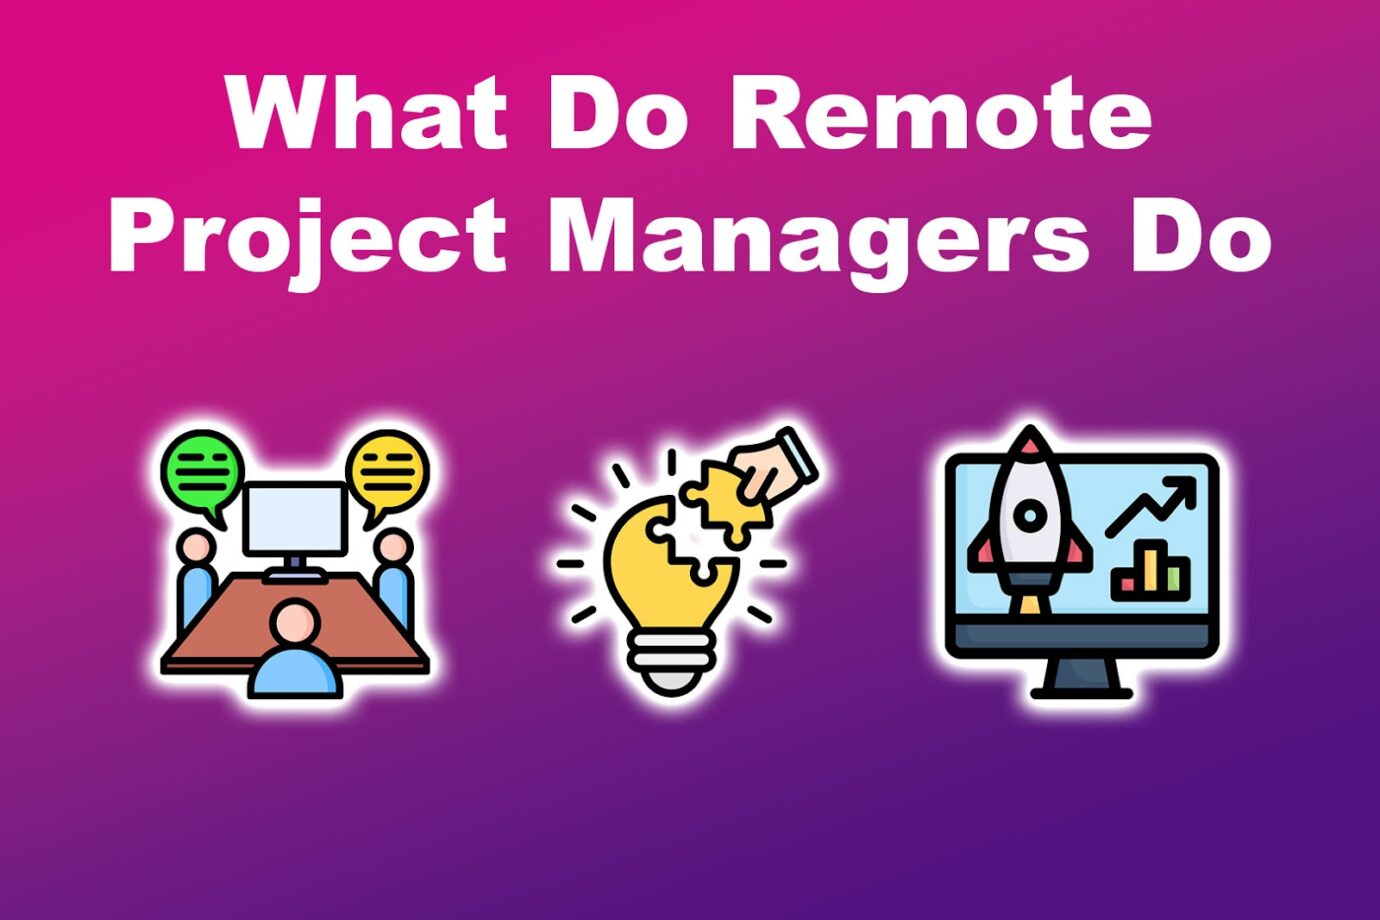 What Do Remote Project Managers Do